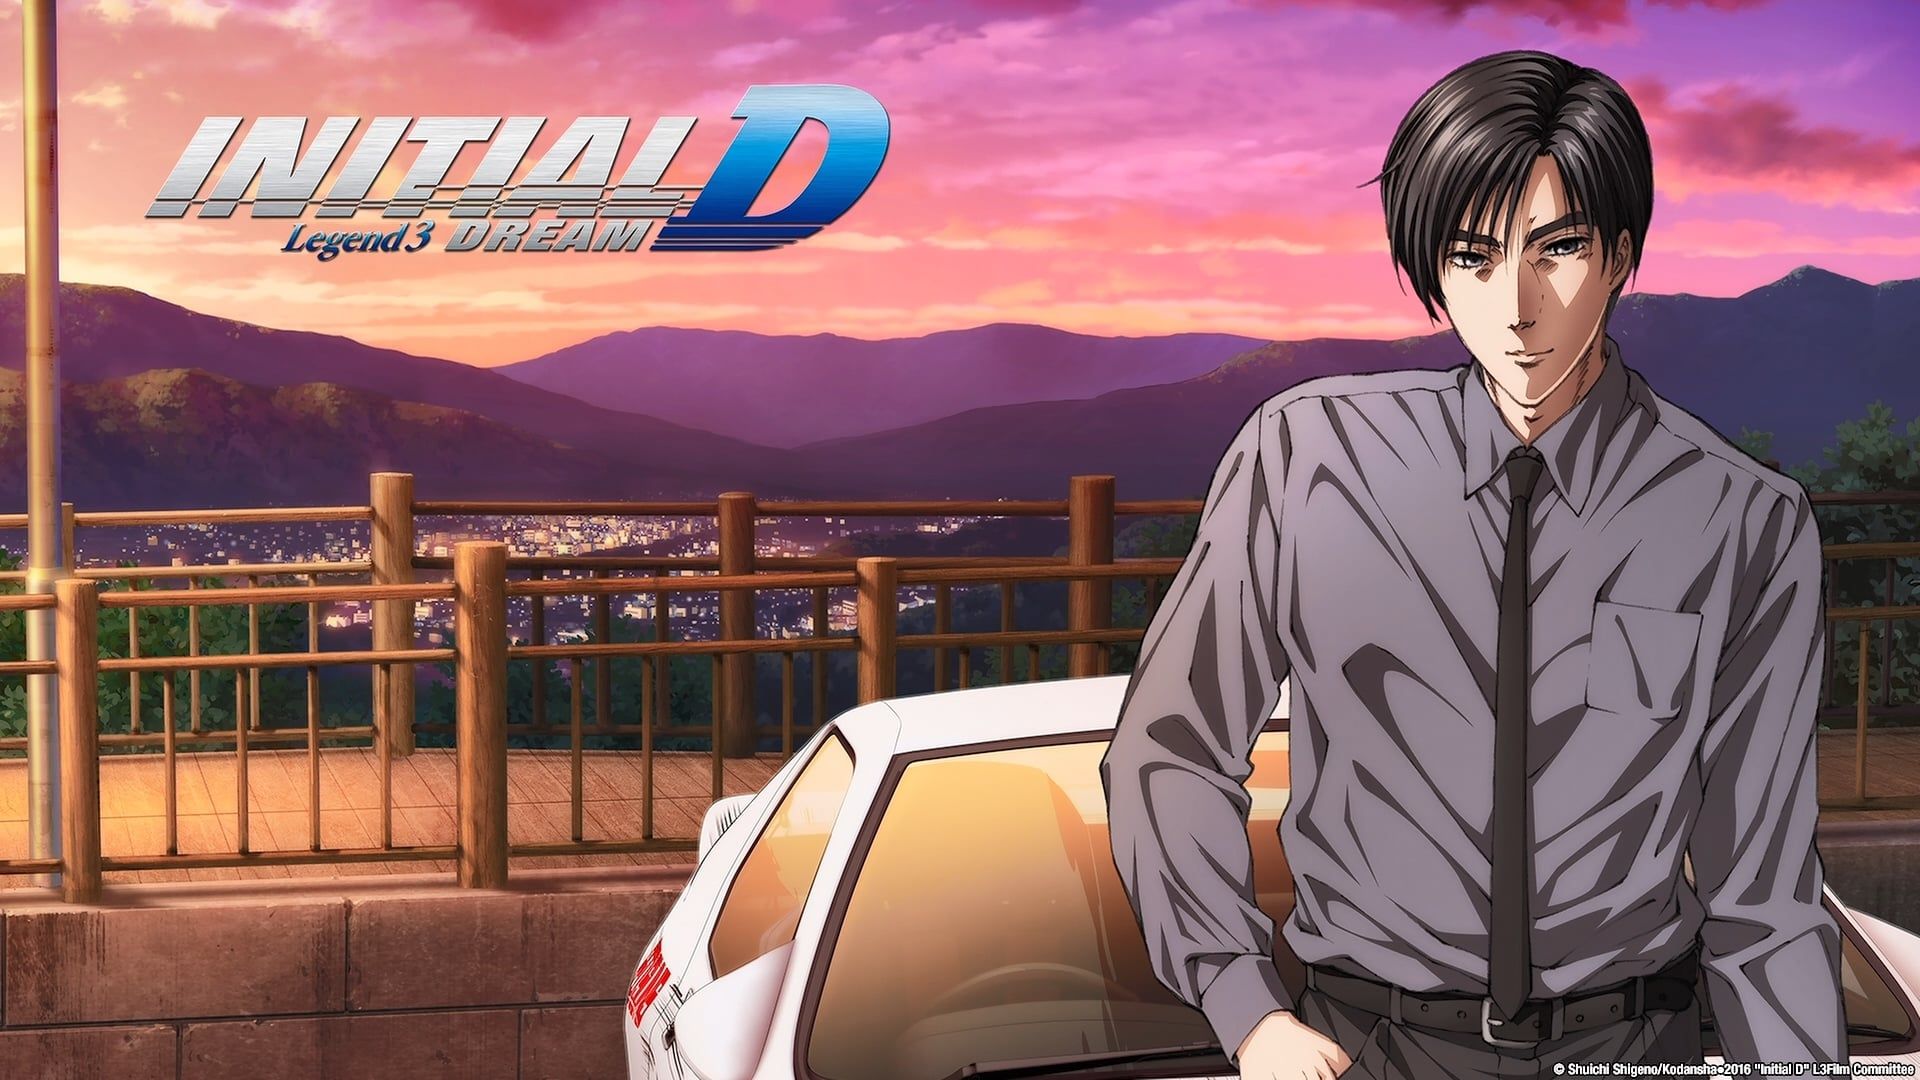 New Initial D the Movie: Legend 3 - Dream background